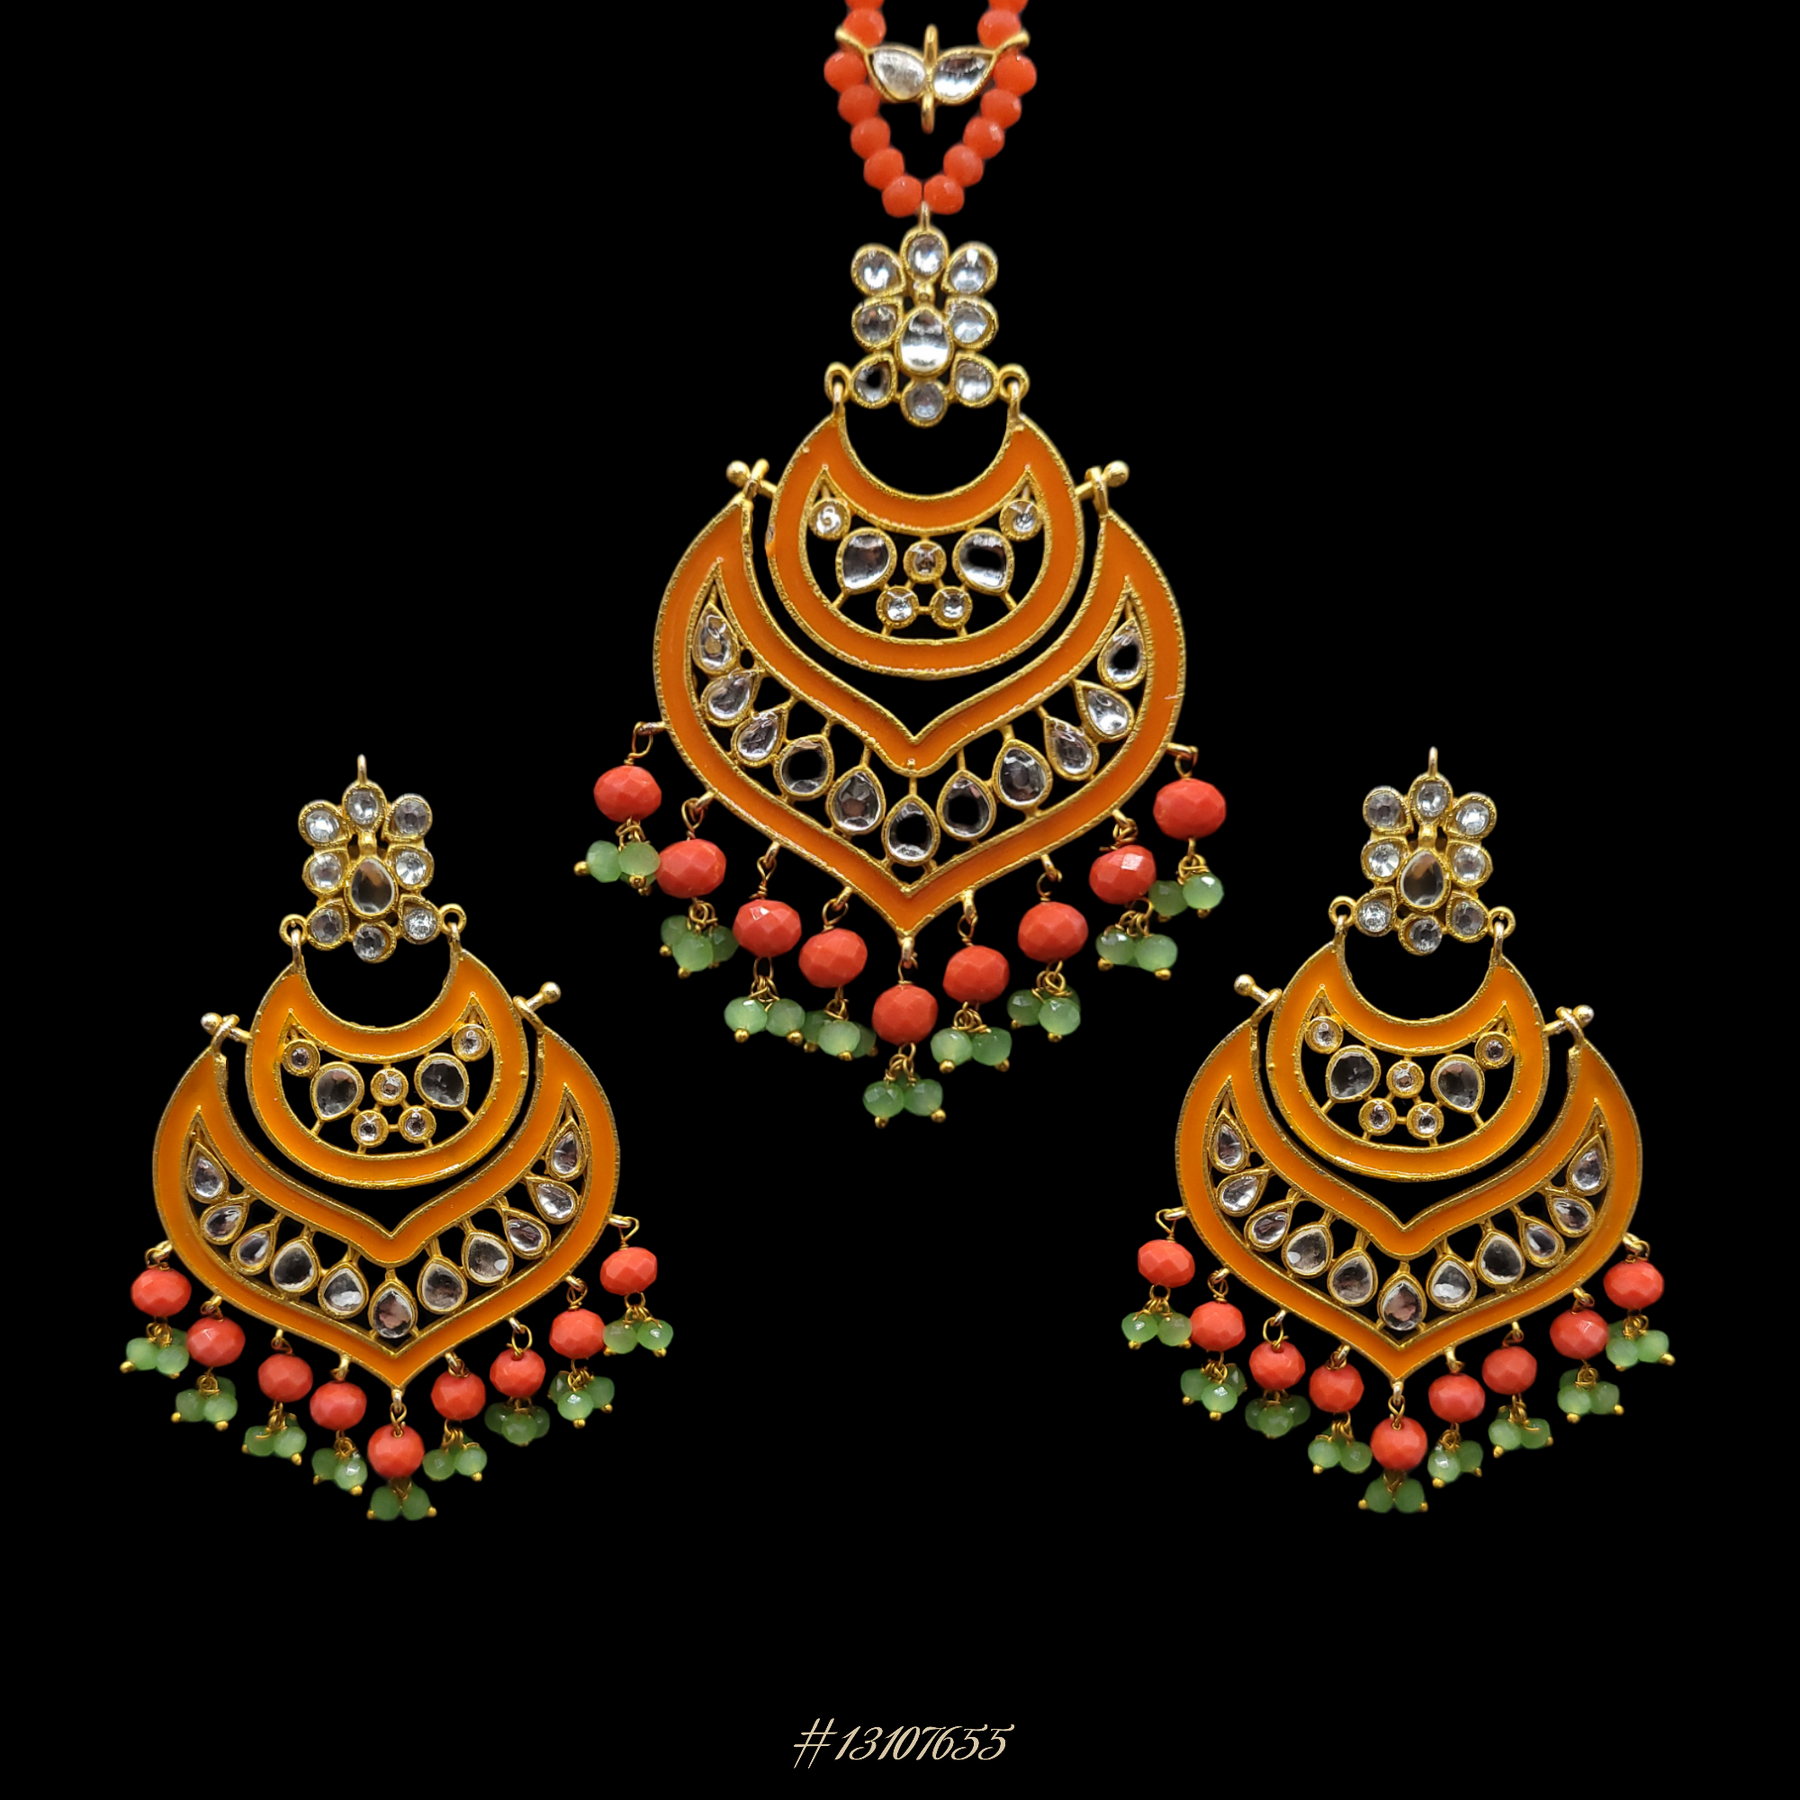 ELEGANT EARRINGS WITH MAANG TIKKA (HEAD PIECE) IN ORANGE, GREEN AND GOLD COLOR